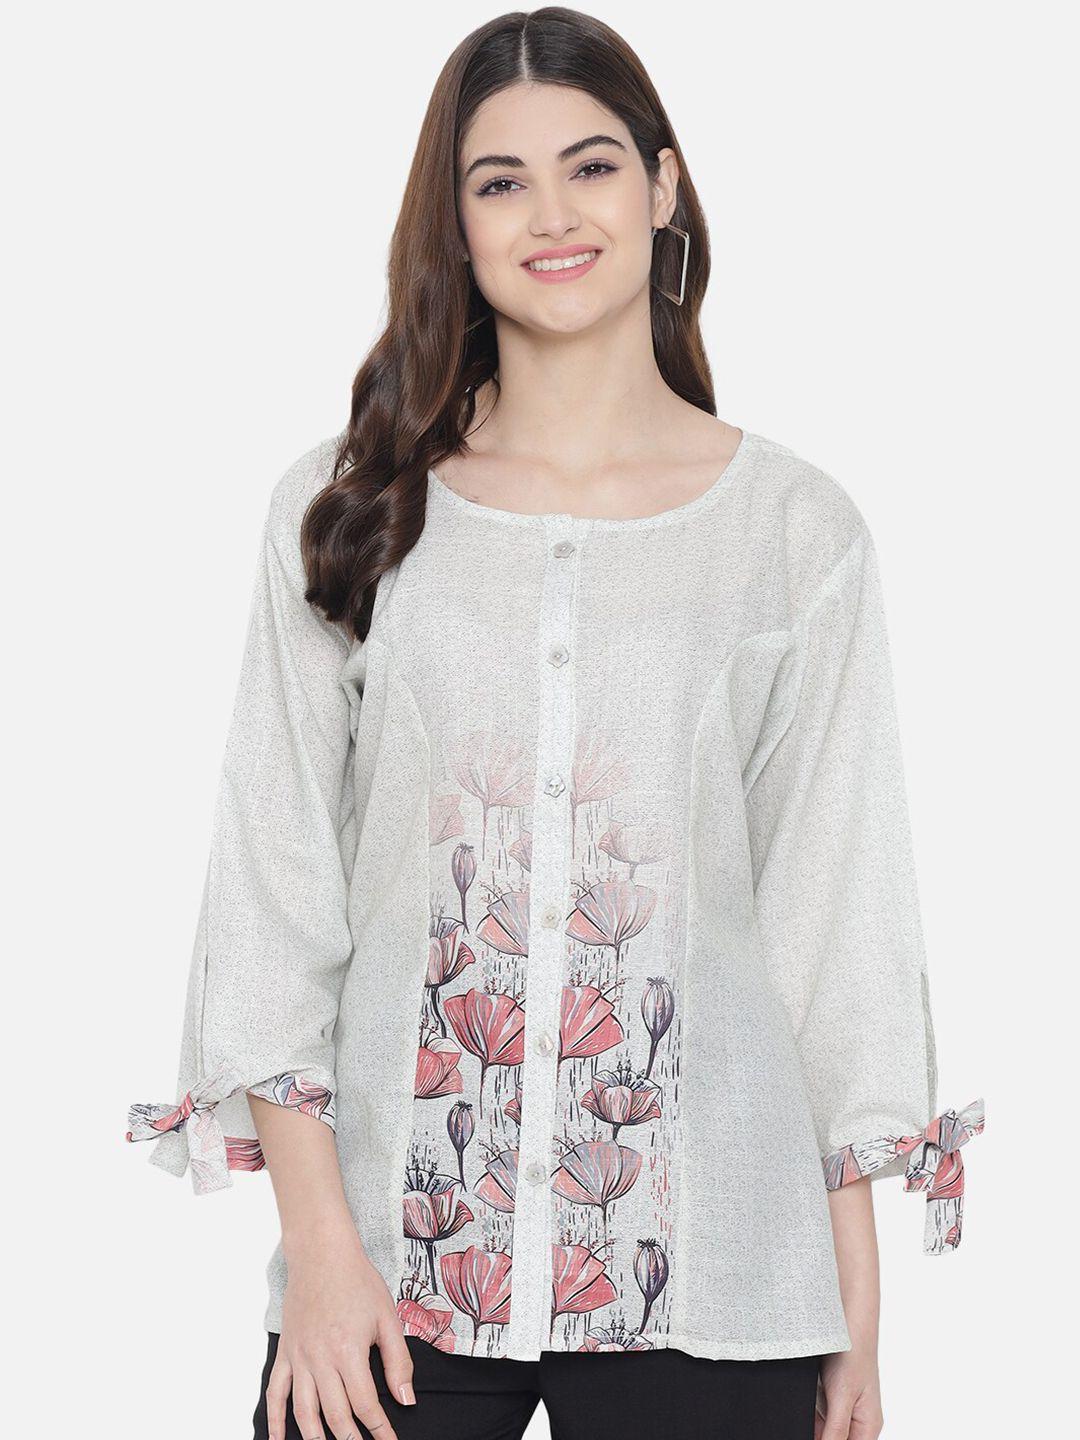 chemistry floral printed shirt style top